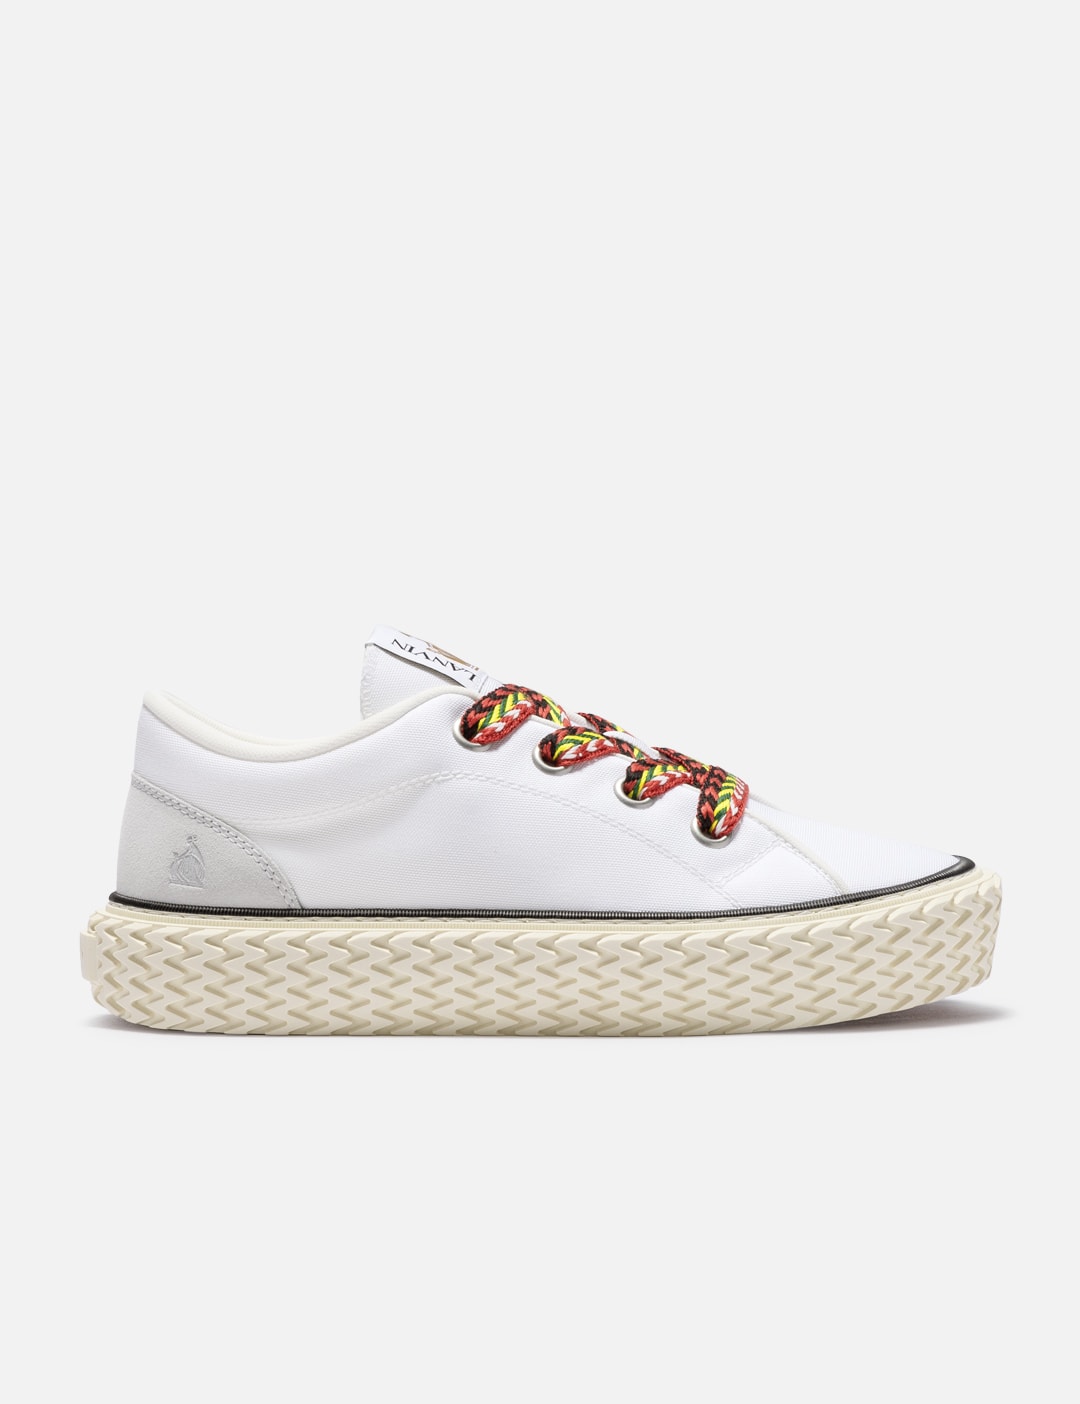 Team Picks, 6 Best Louis Vuitton Sneakers to Buy Now, Sneakers, Sports  Memorabilia & Modern Collectibles